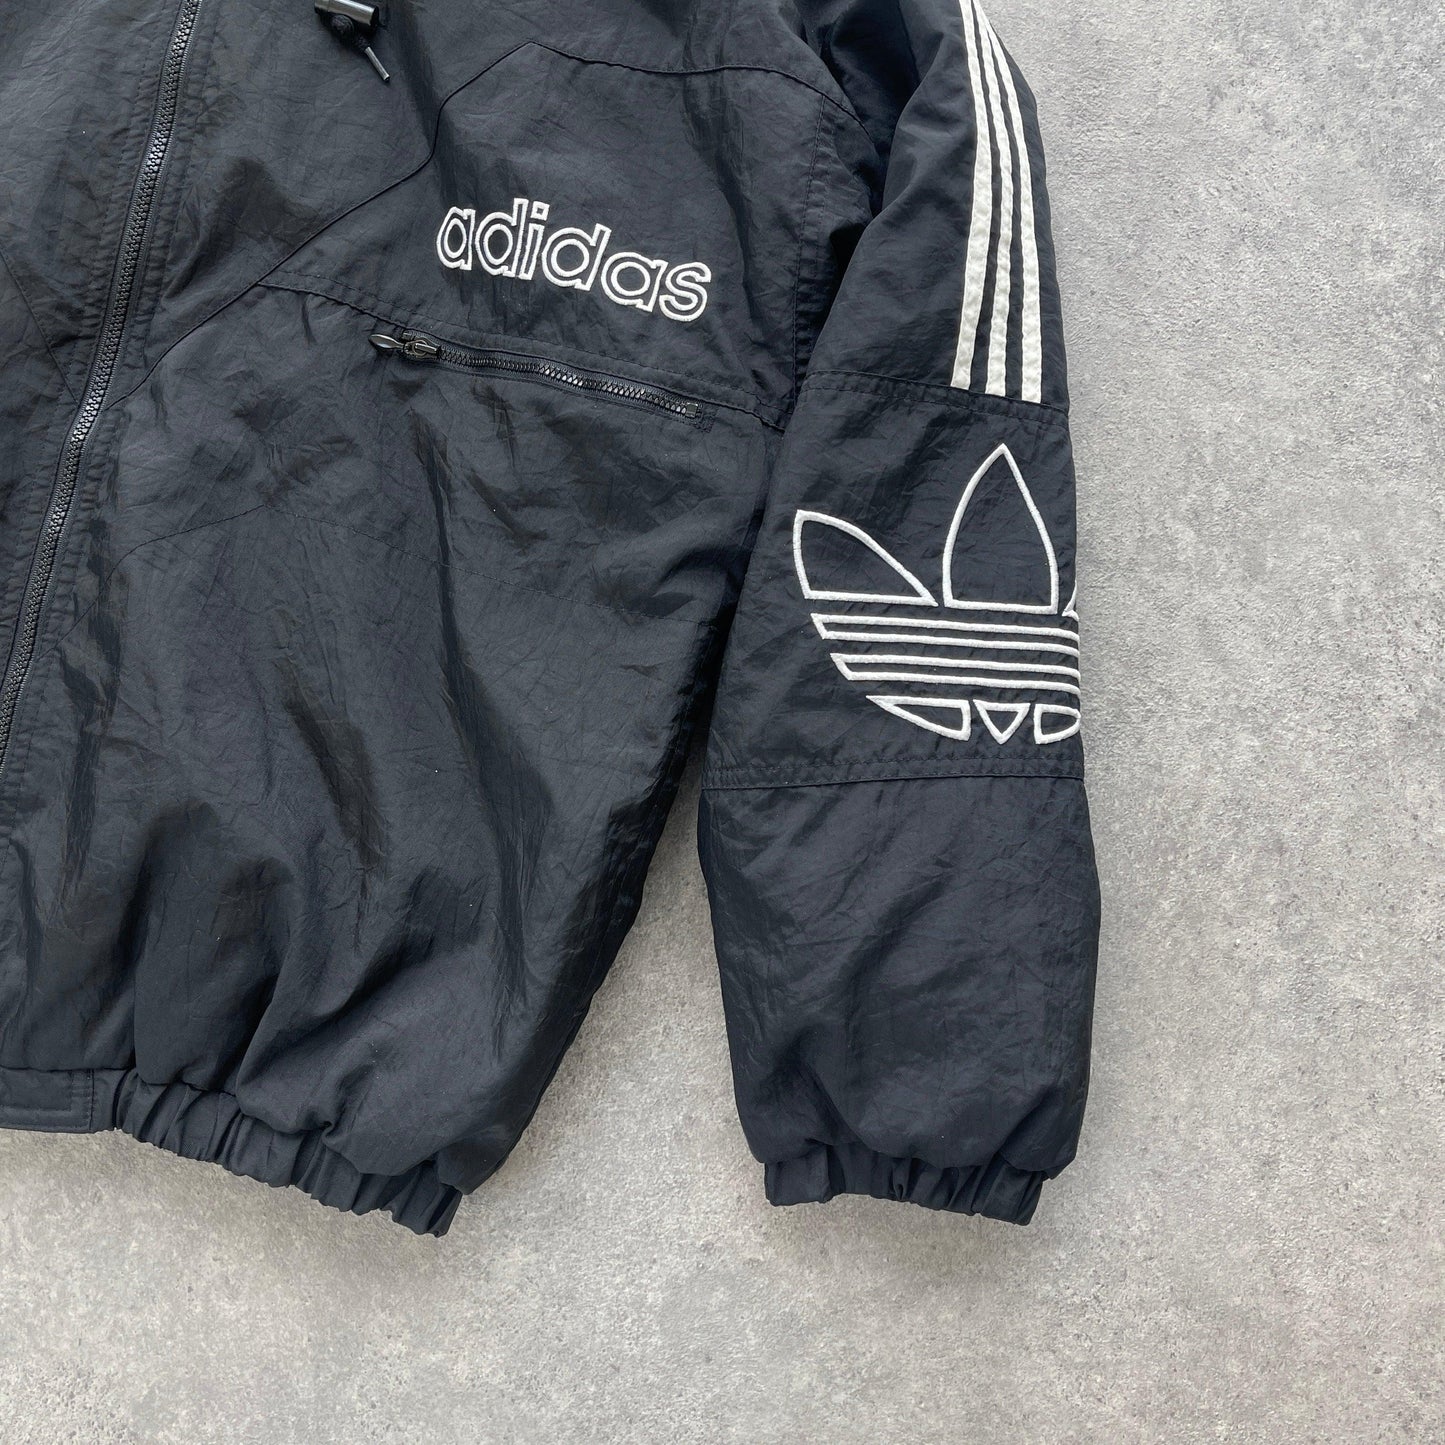 Adidas 1990s padded spellout bomber jacket (M) - Known Source